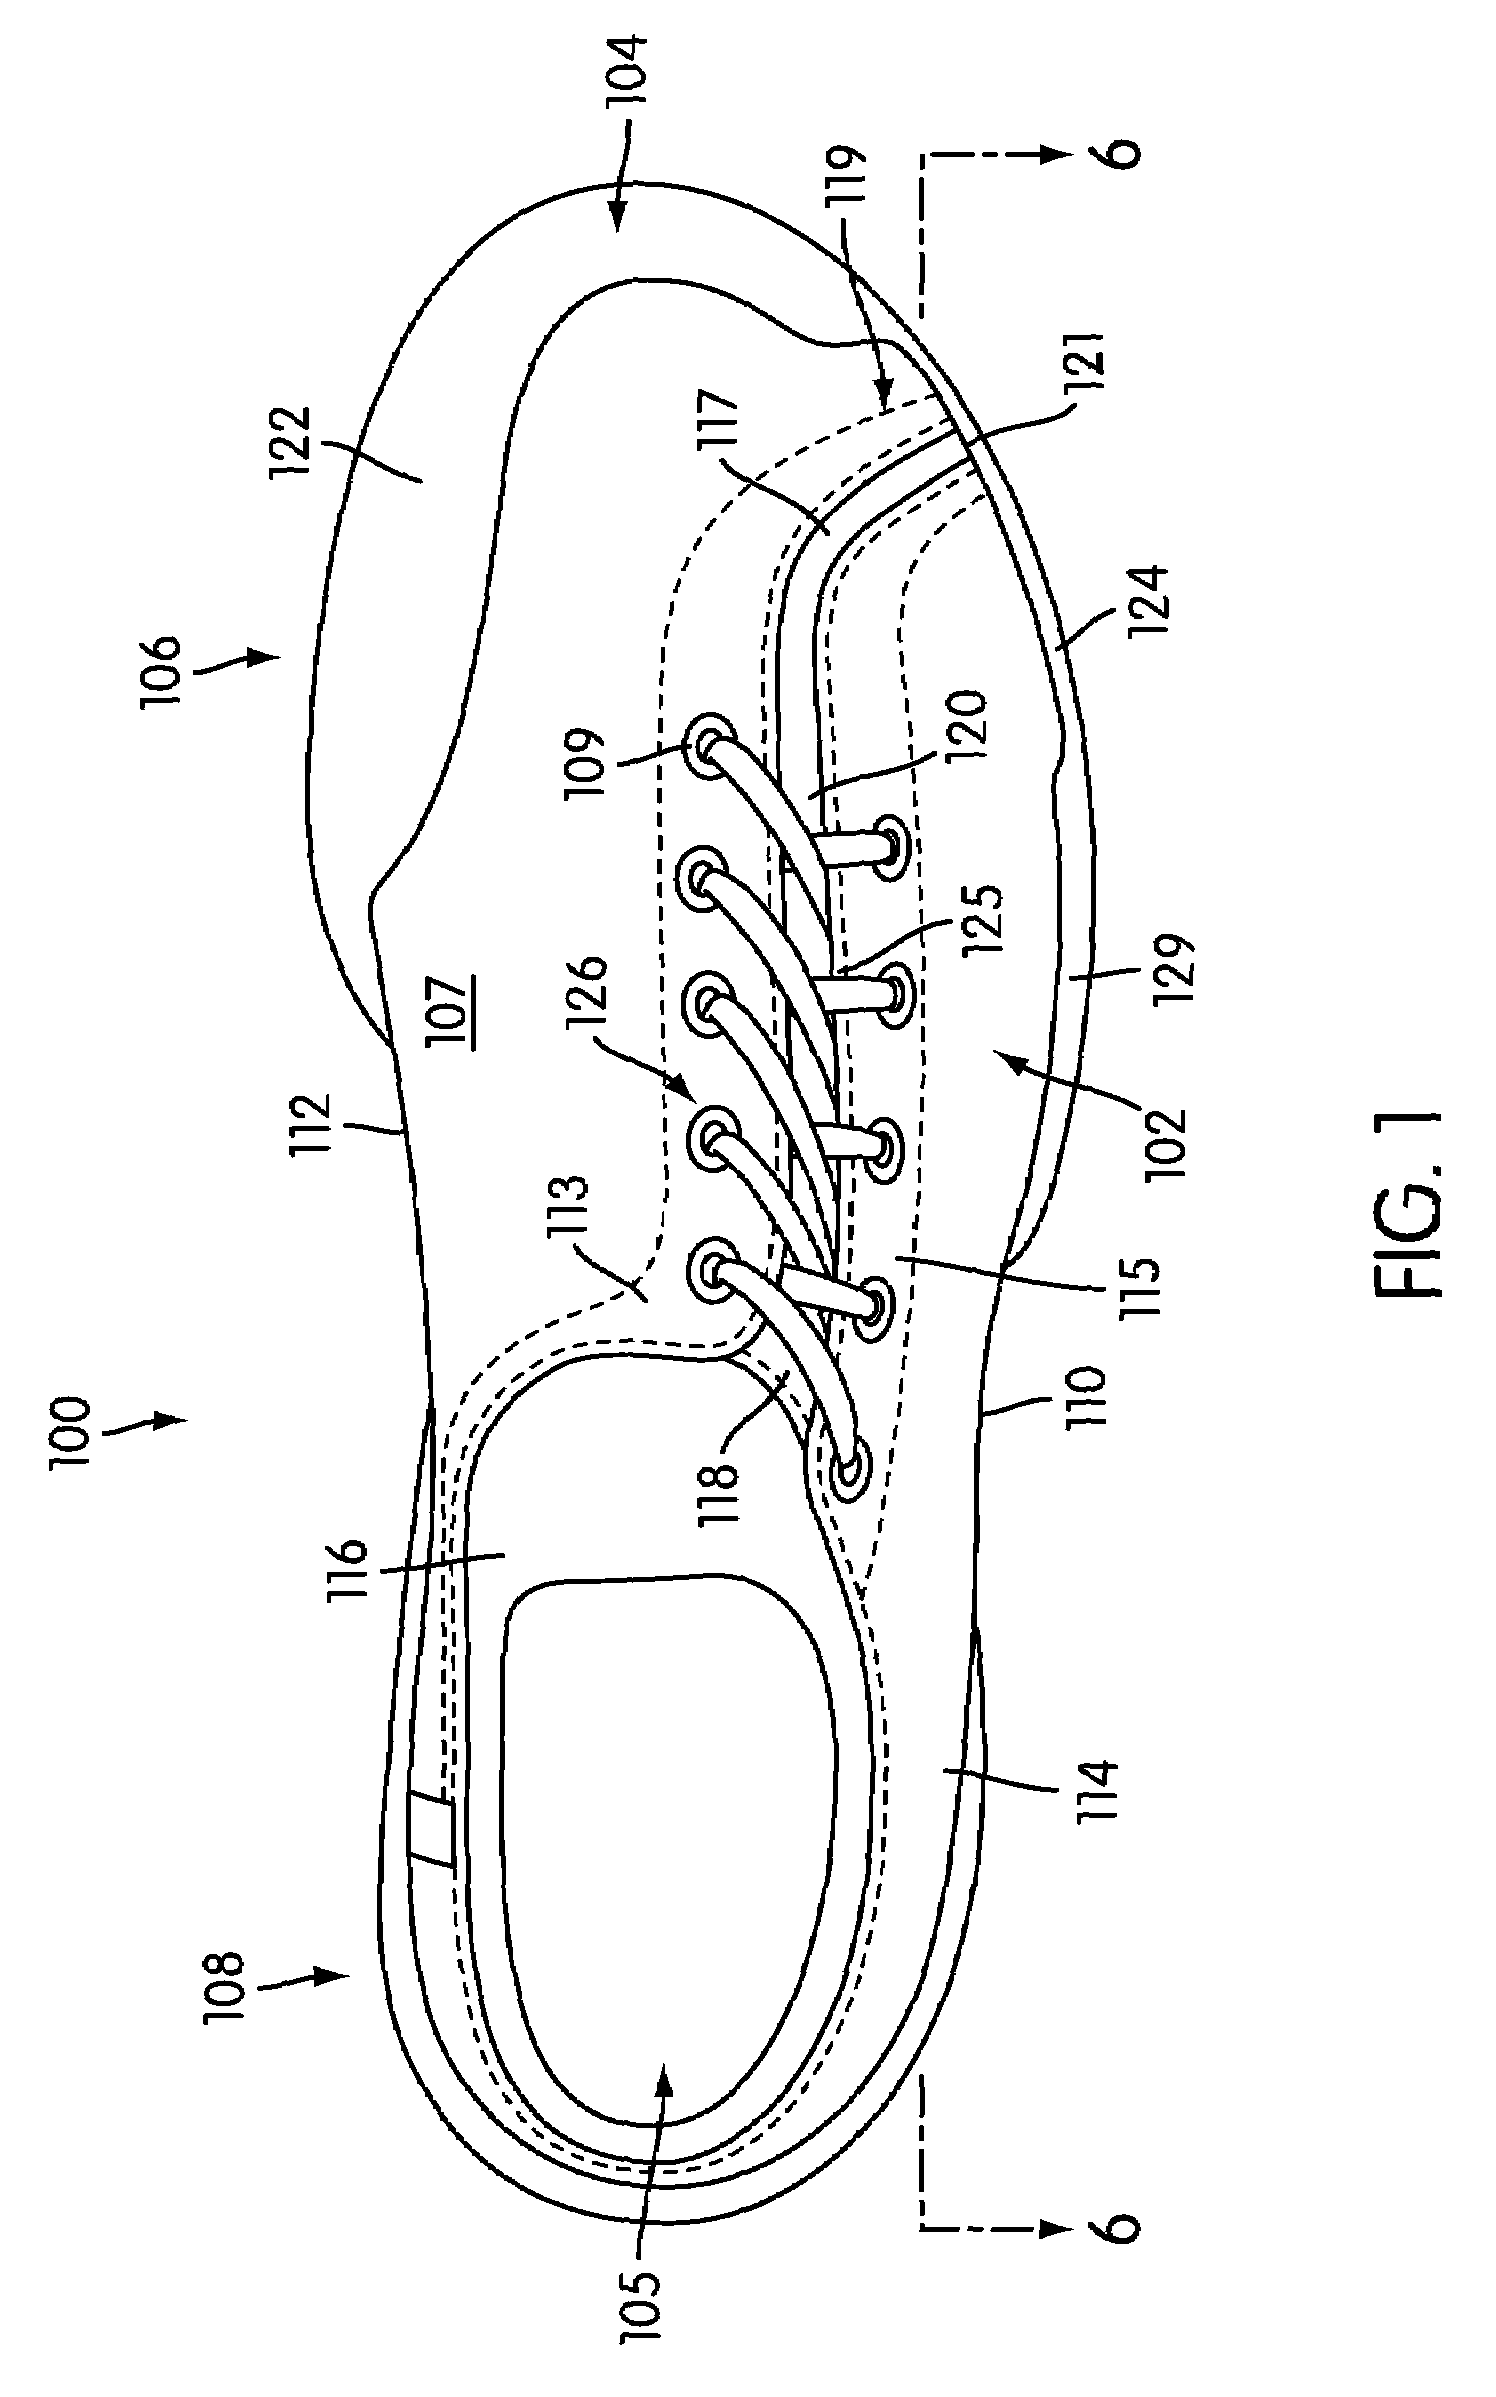 Article of footwear for fencing